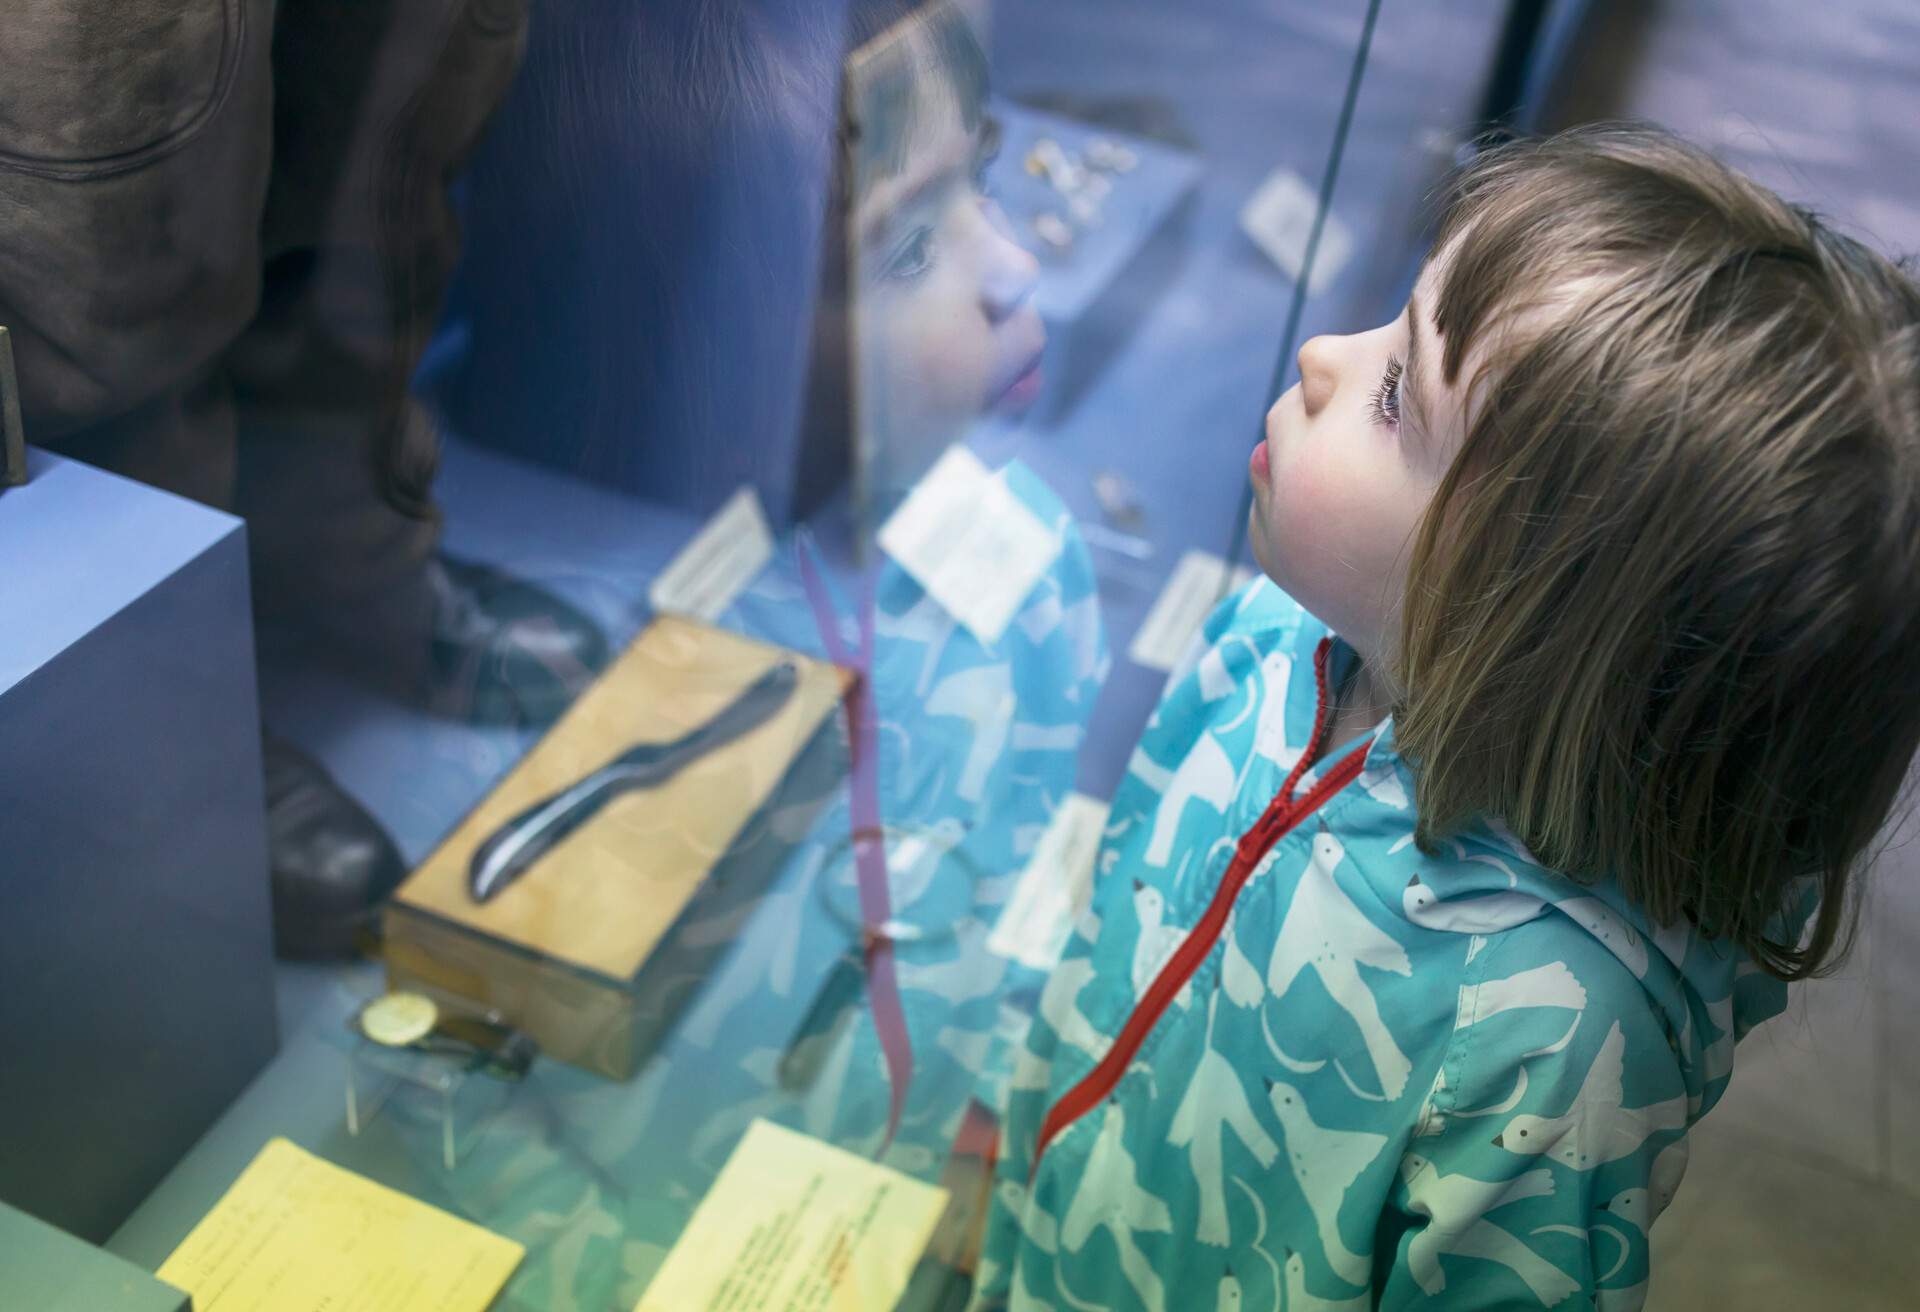 Little boy looking through museum display window.. Reflection in the glass.